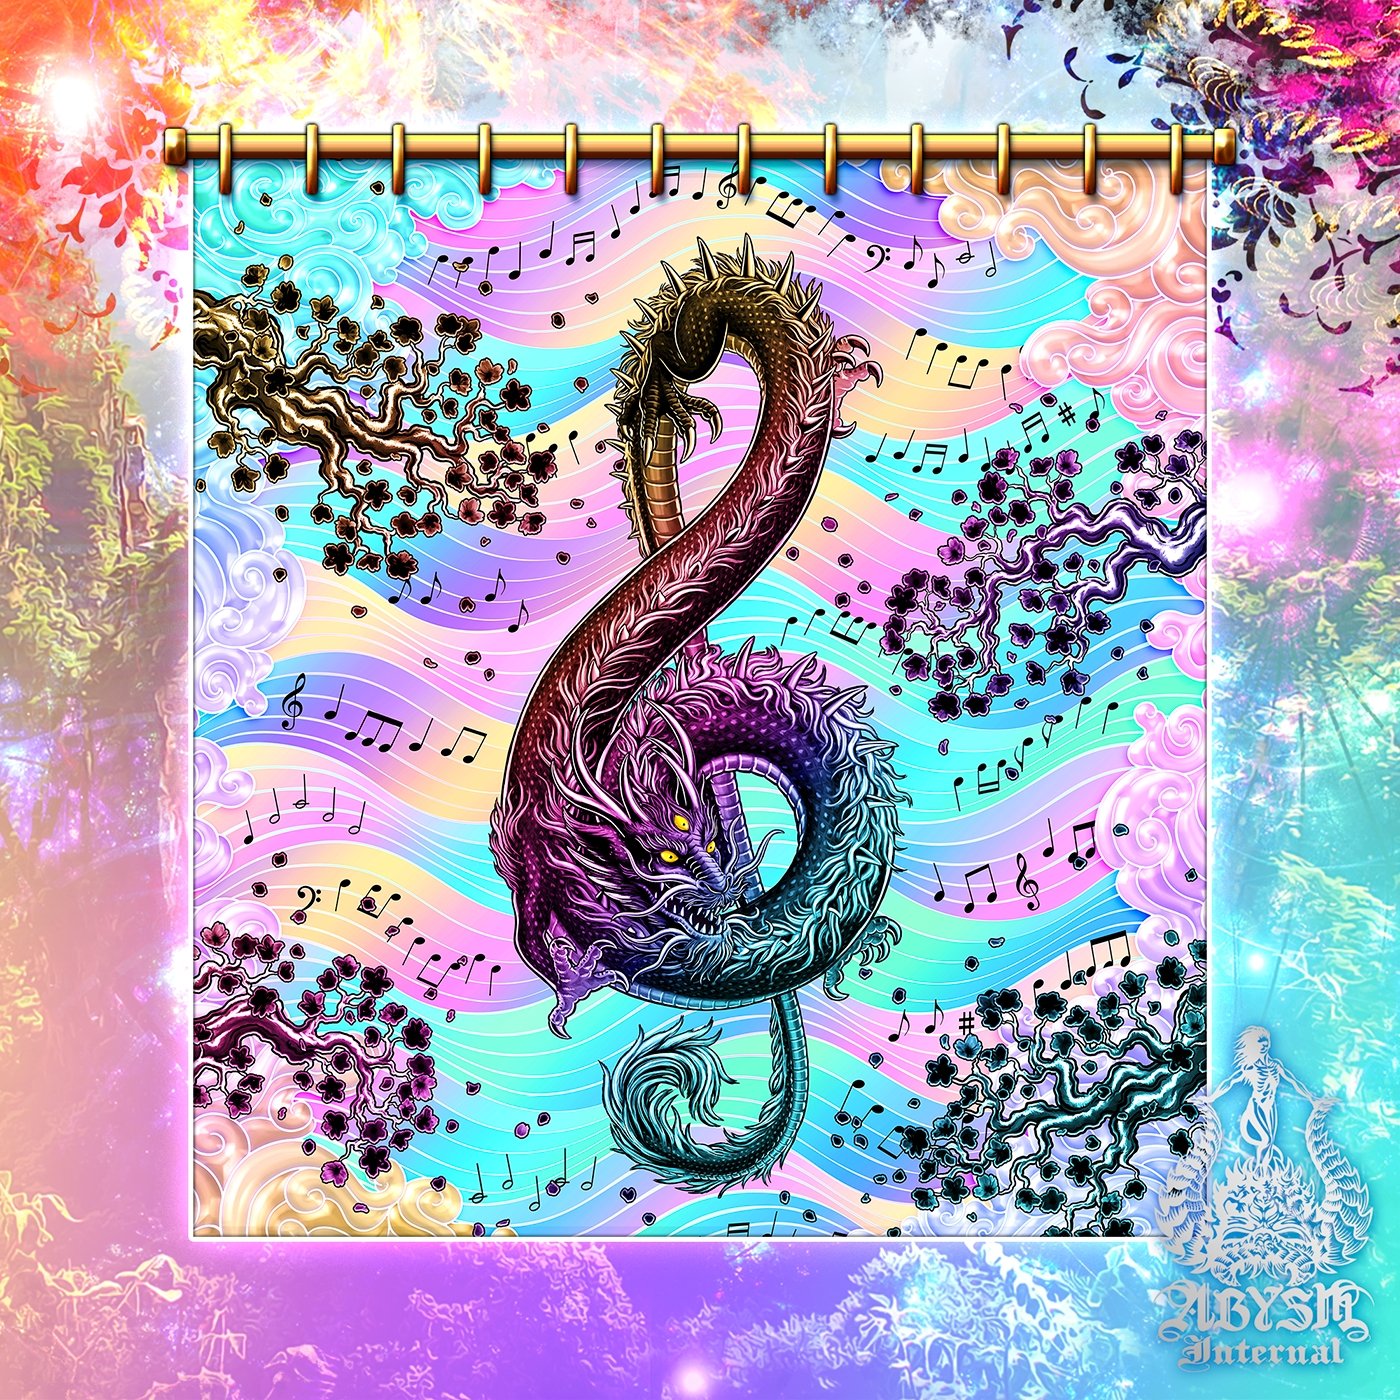 Aesthetic Shower Curtain, Music Art, Holographic and Indie Bathroom Decor, Treble Clef, Eclectic and Funky Home - Pastel Punk Black Dragon - Abysm Internal